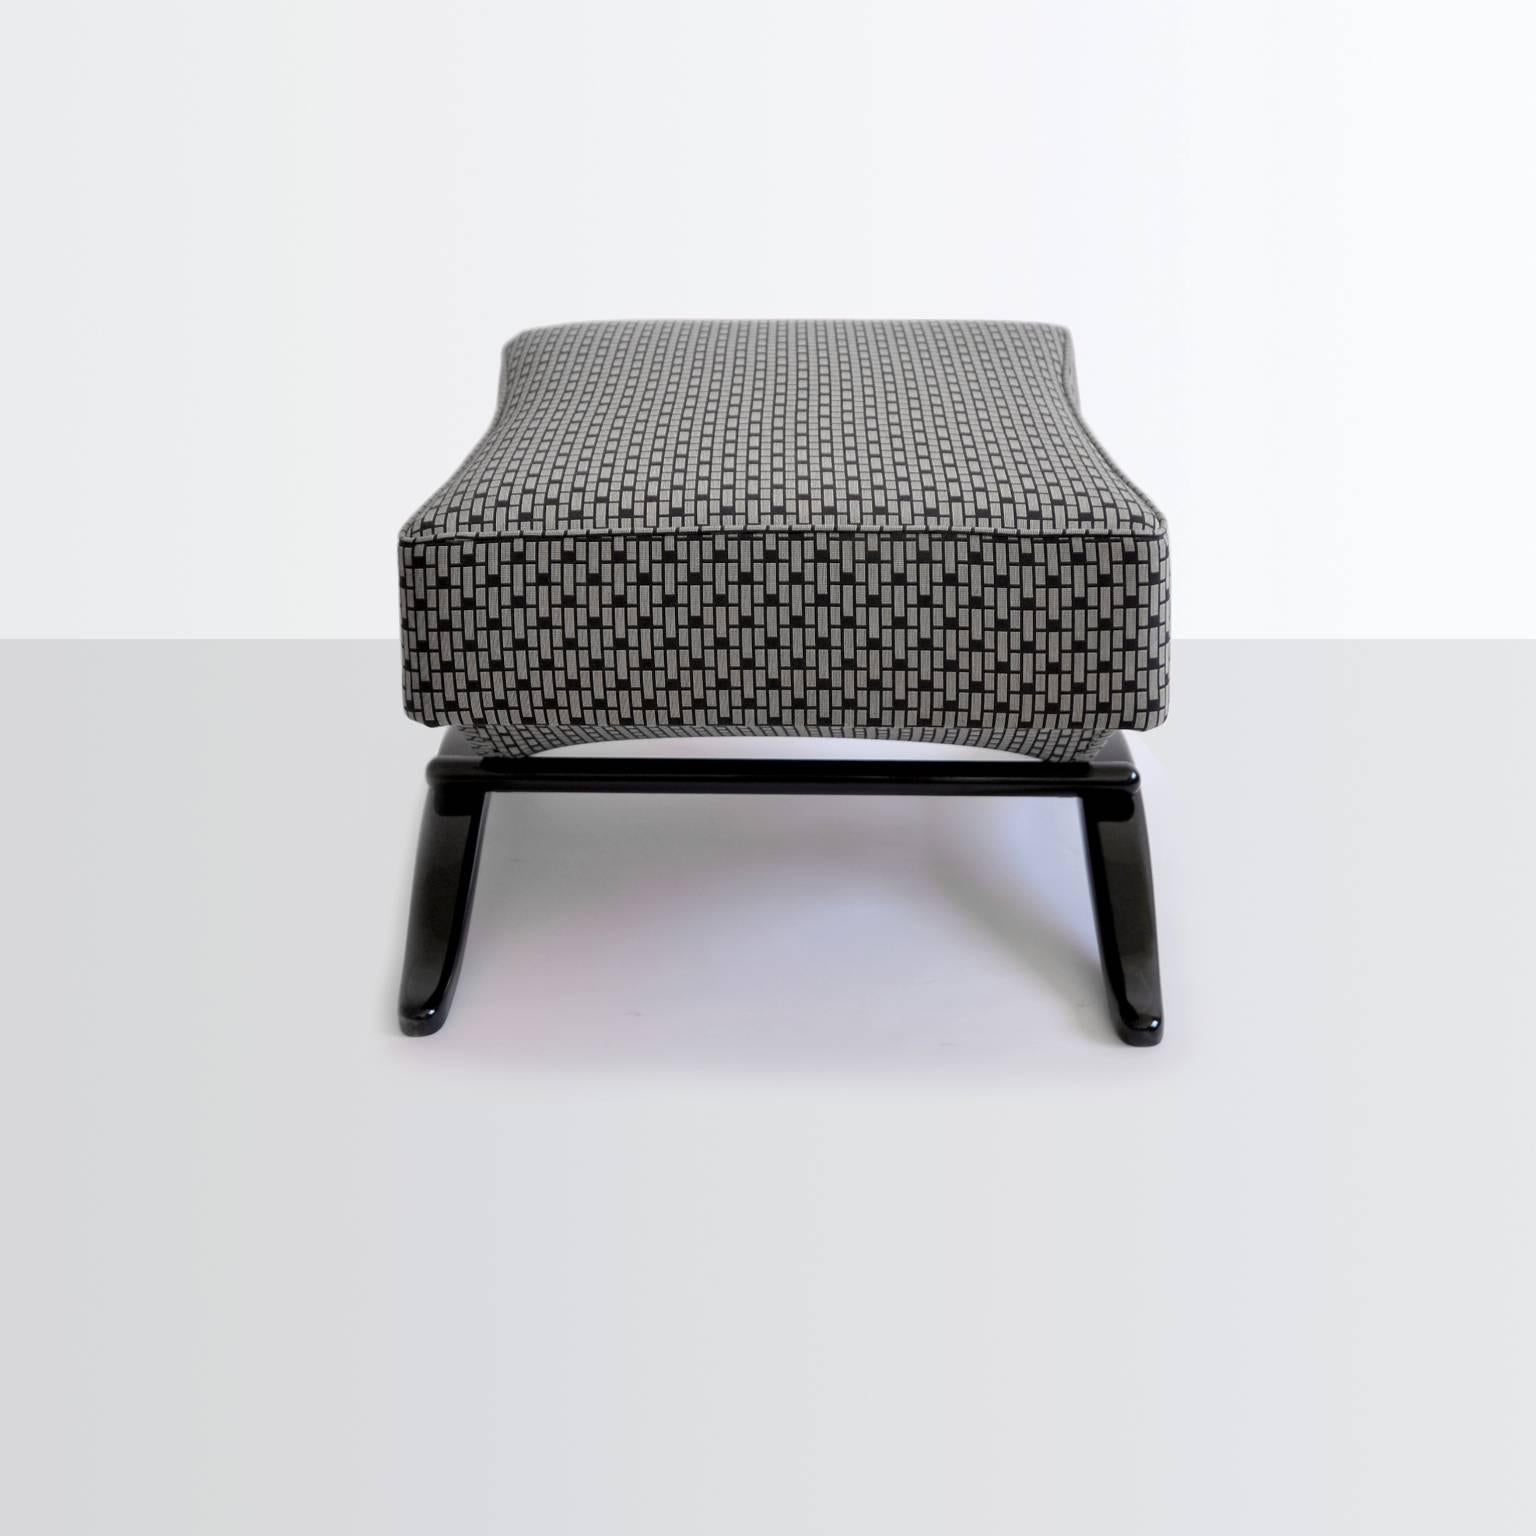 German Customizable Modernist Stool, Glossy Lacquered Wood, Fabric / Leather Upholstery For Sale